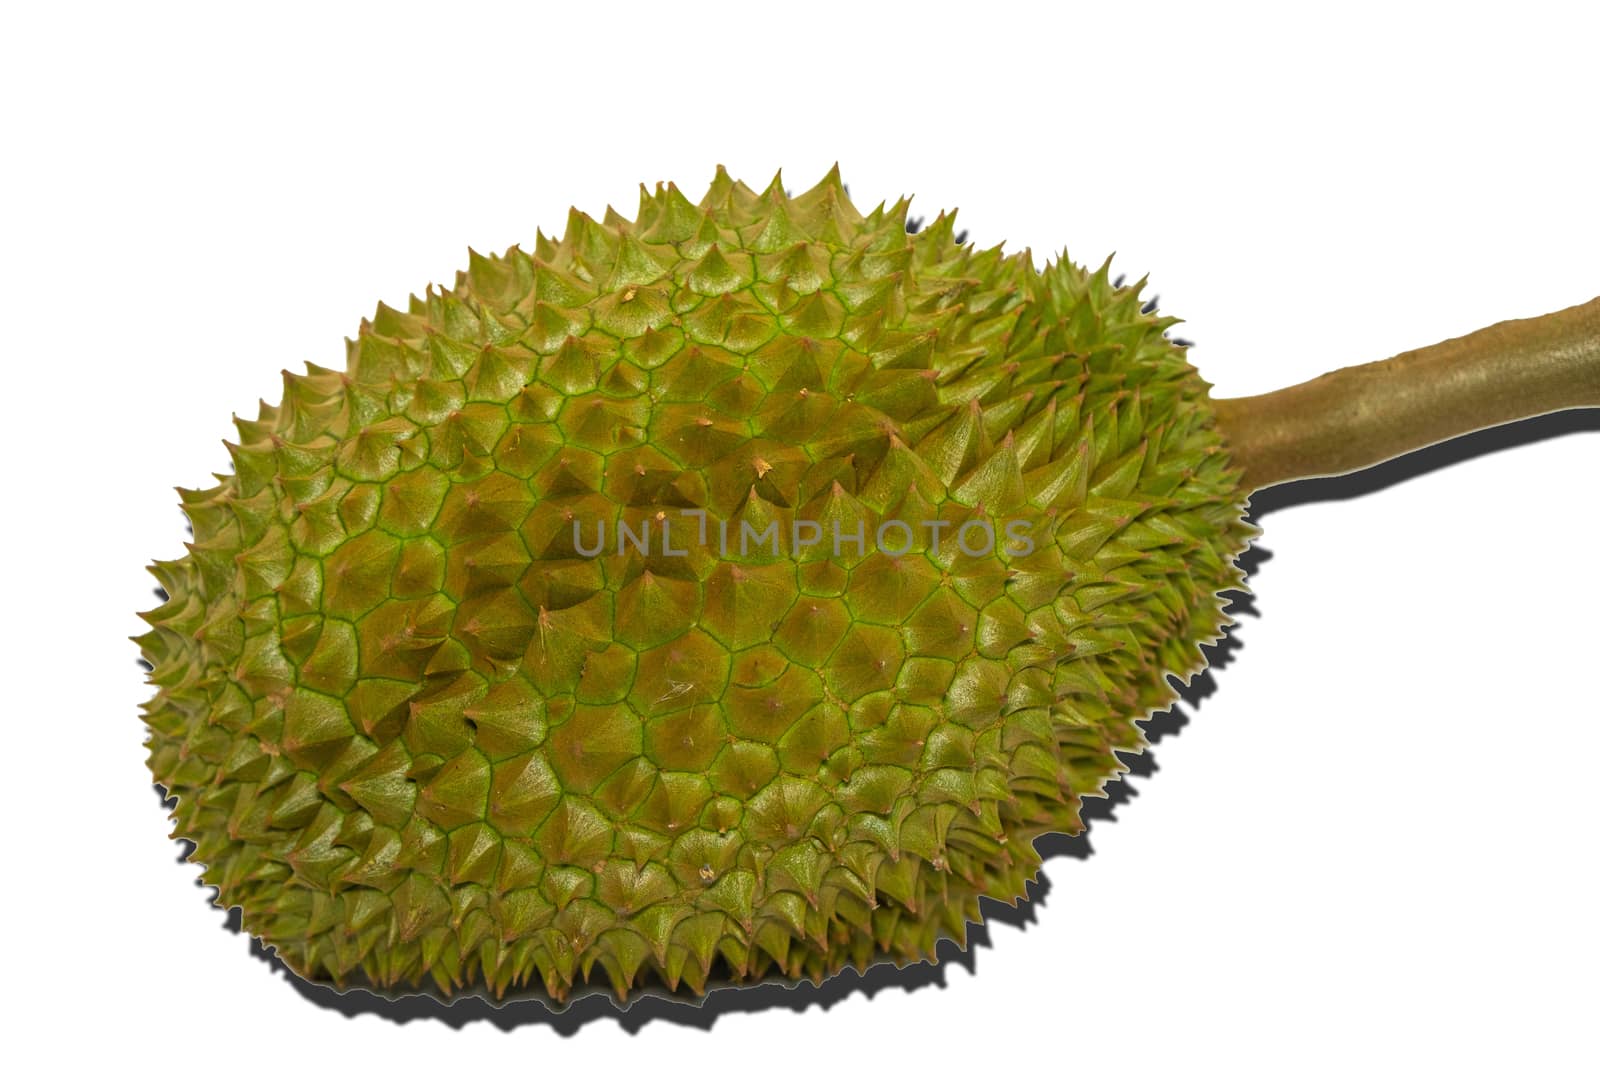 The Durian the famous fruit from Thailand, it also known as The King of Fruits on white background.